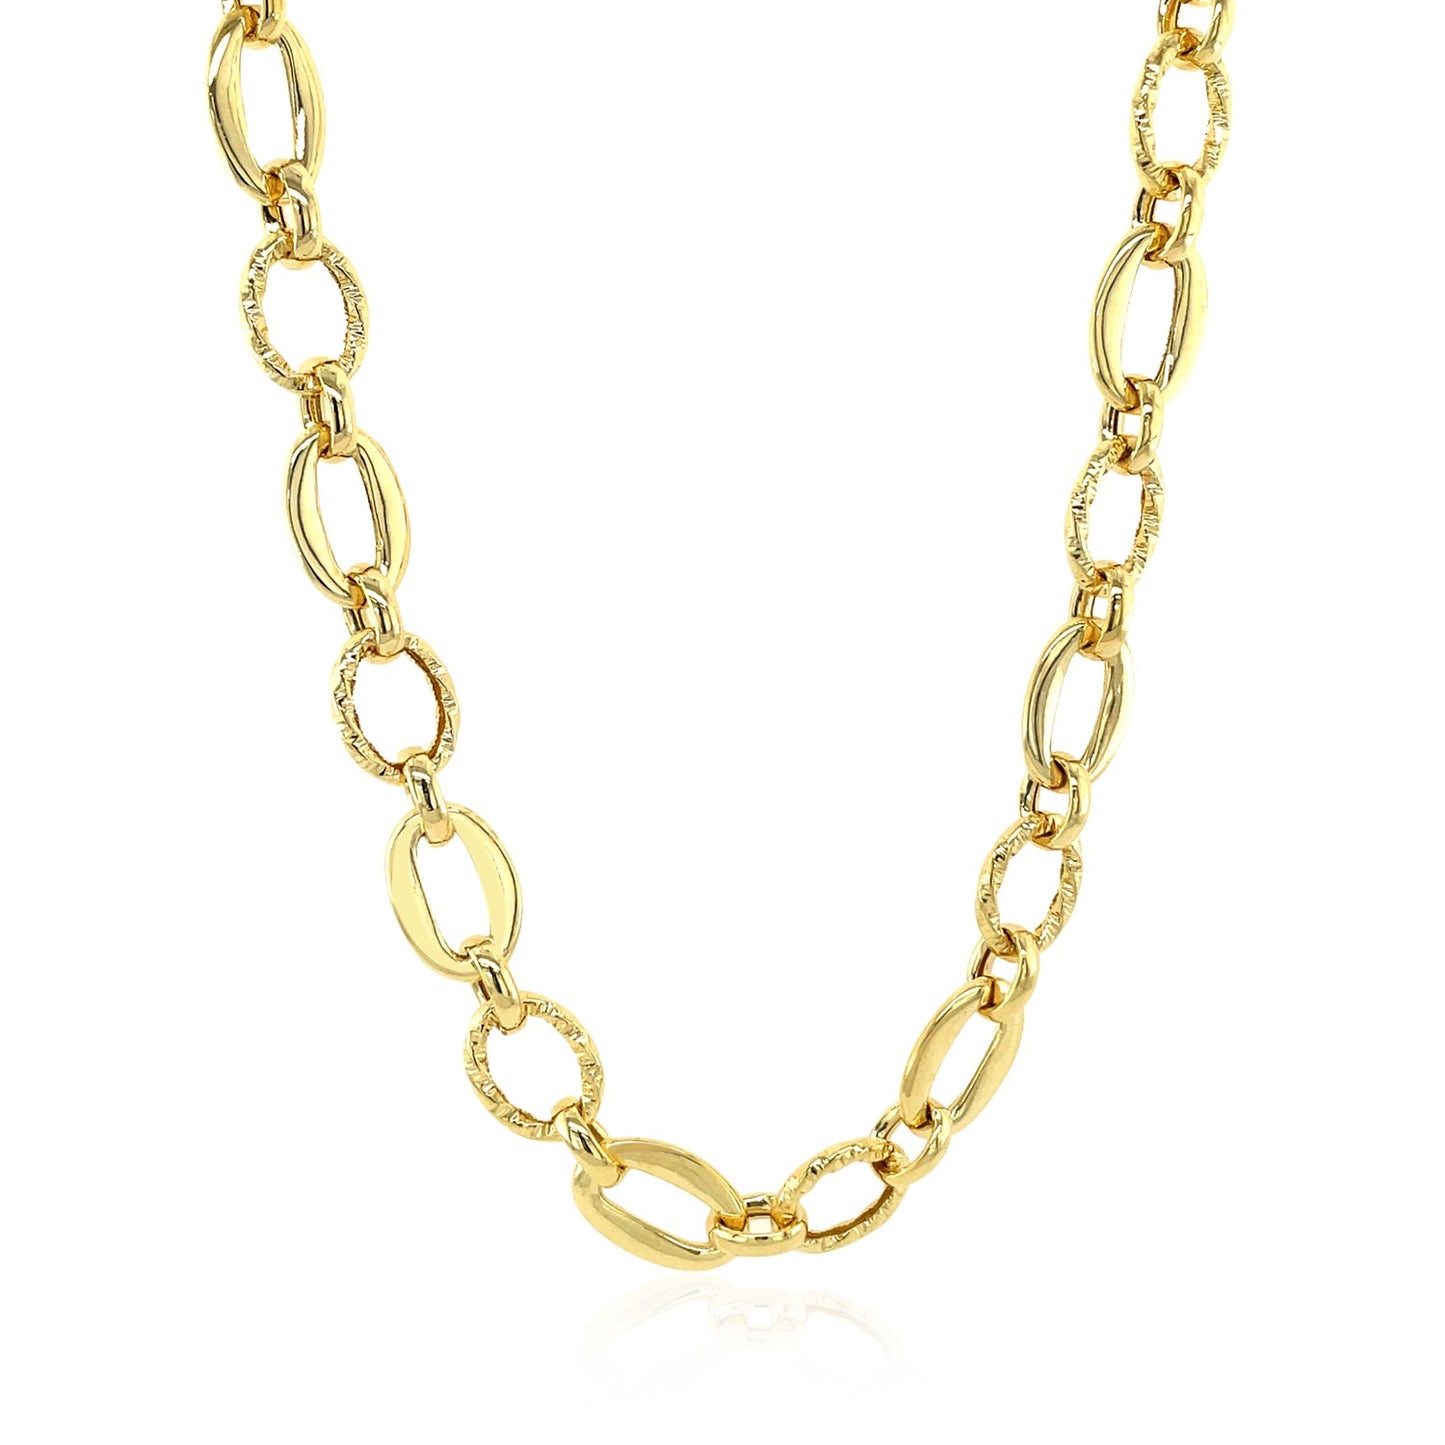 Shiny and Textured Oval Link Necklace in 14k Yellow Gold